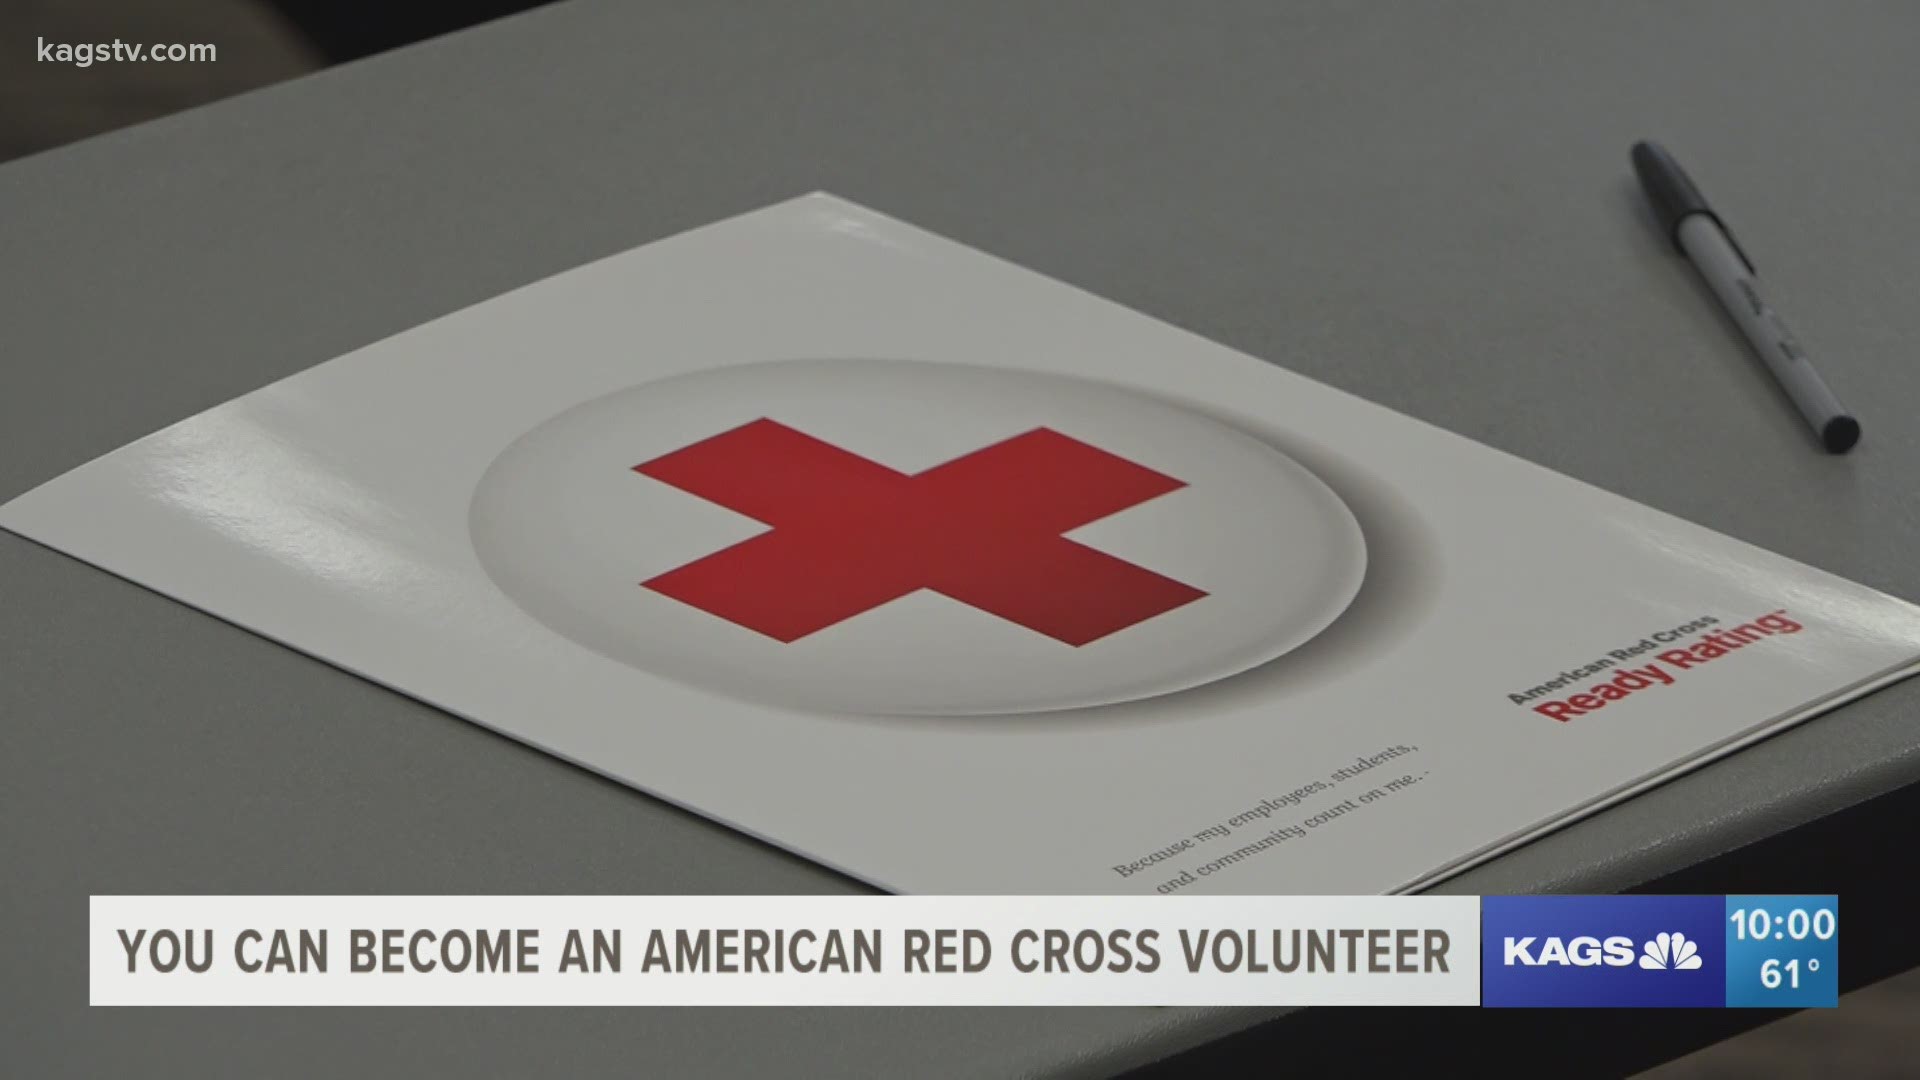 Over at the Brazos Center Vaccine Hub, the American Red Cross began in-person seminars to train anyone to become a first responder.